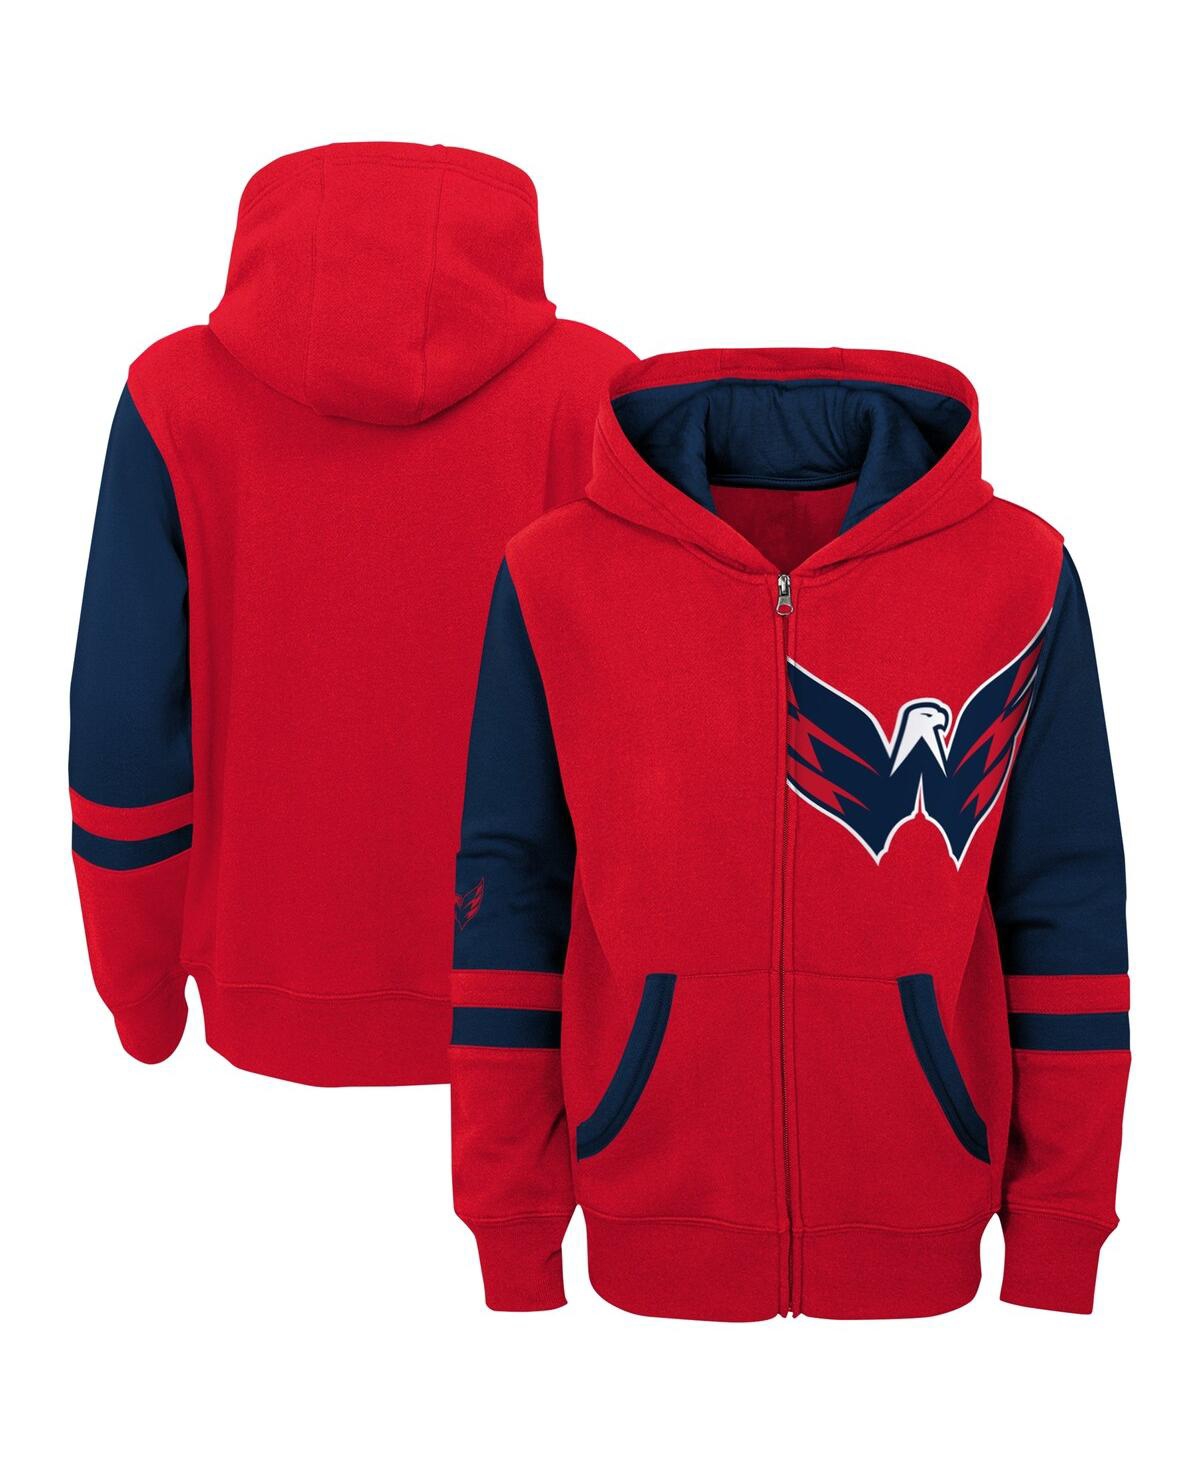 Outerstuff Babies' Preschool Boys And Girls  Red Washington Capitals Face Off Full Zip Hoodie